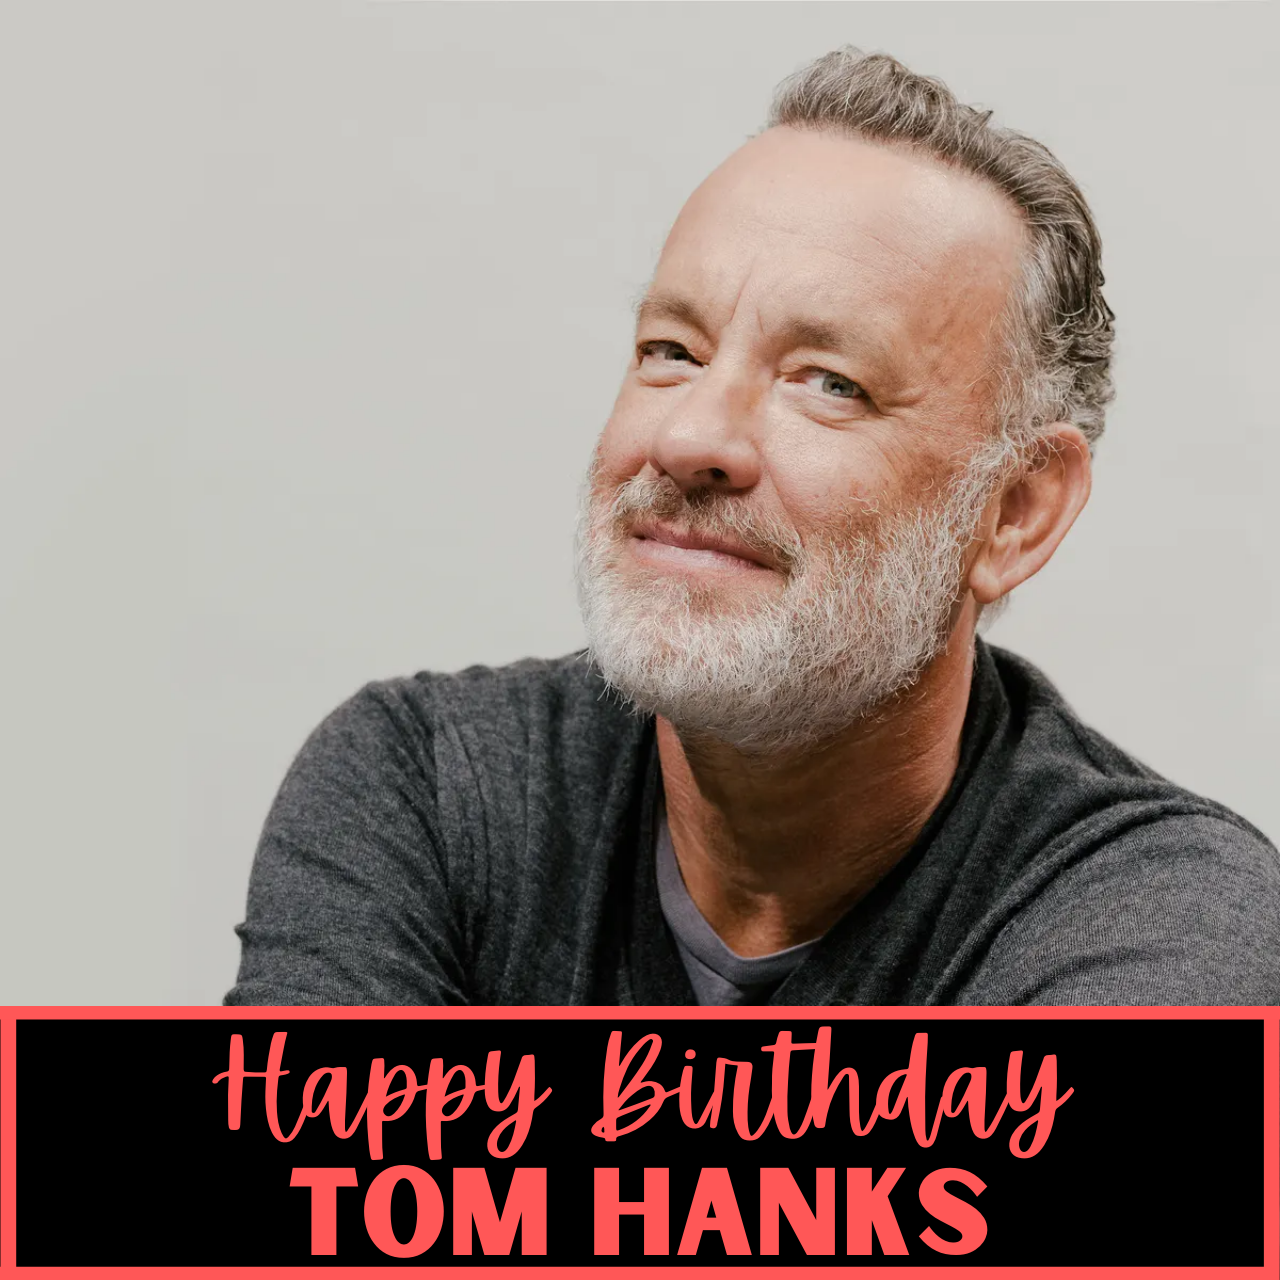 Happy Birthday Tom Hanks: Wishes, Photos (Images), and Video to greet 'Robert Langdon'